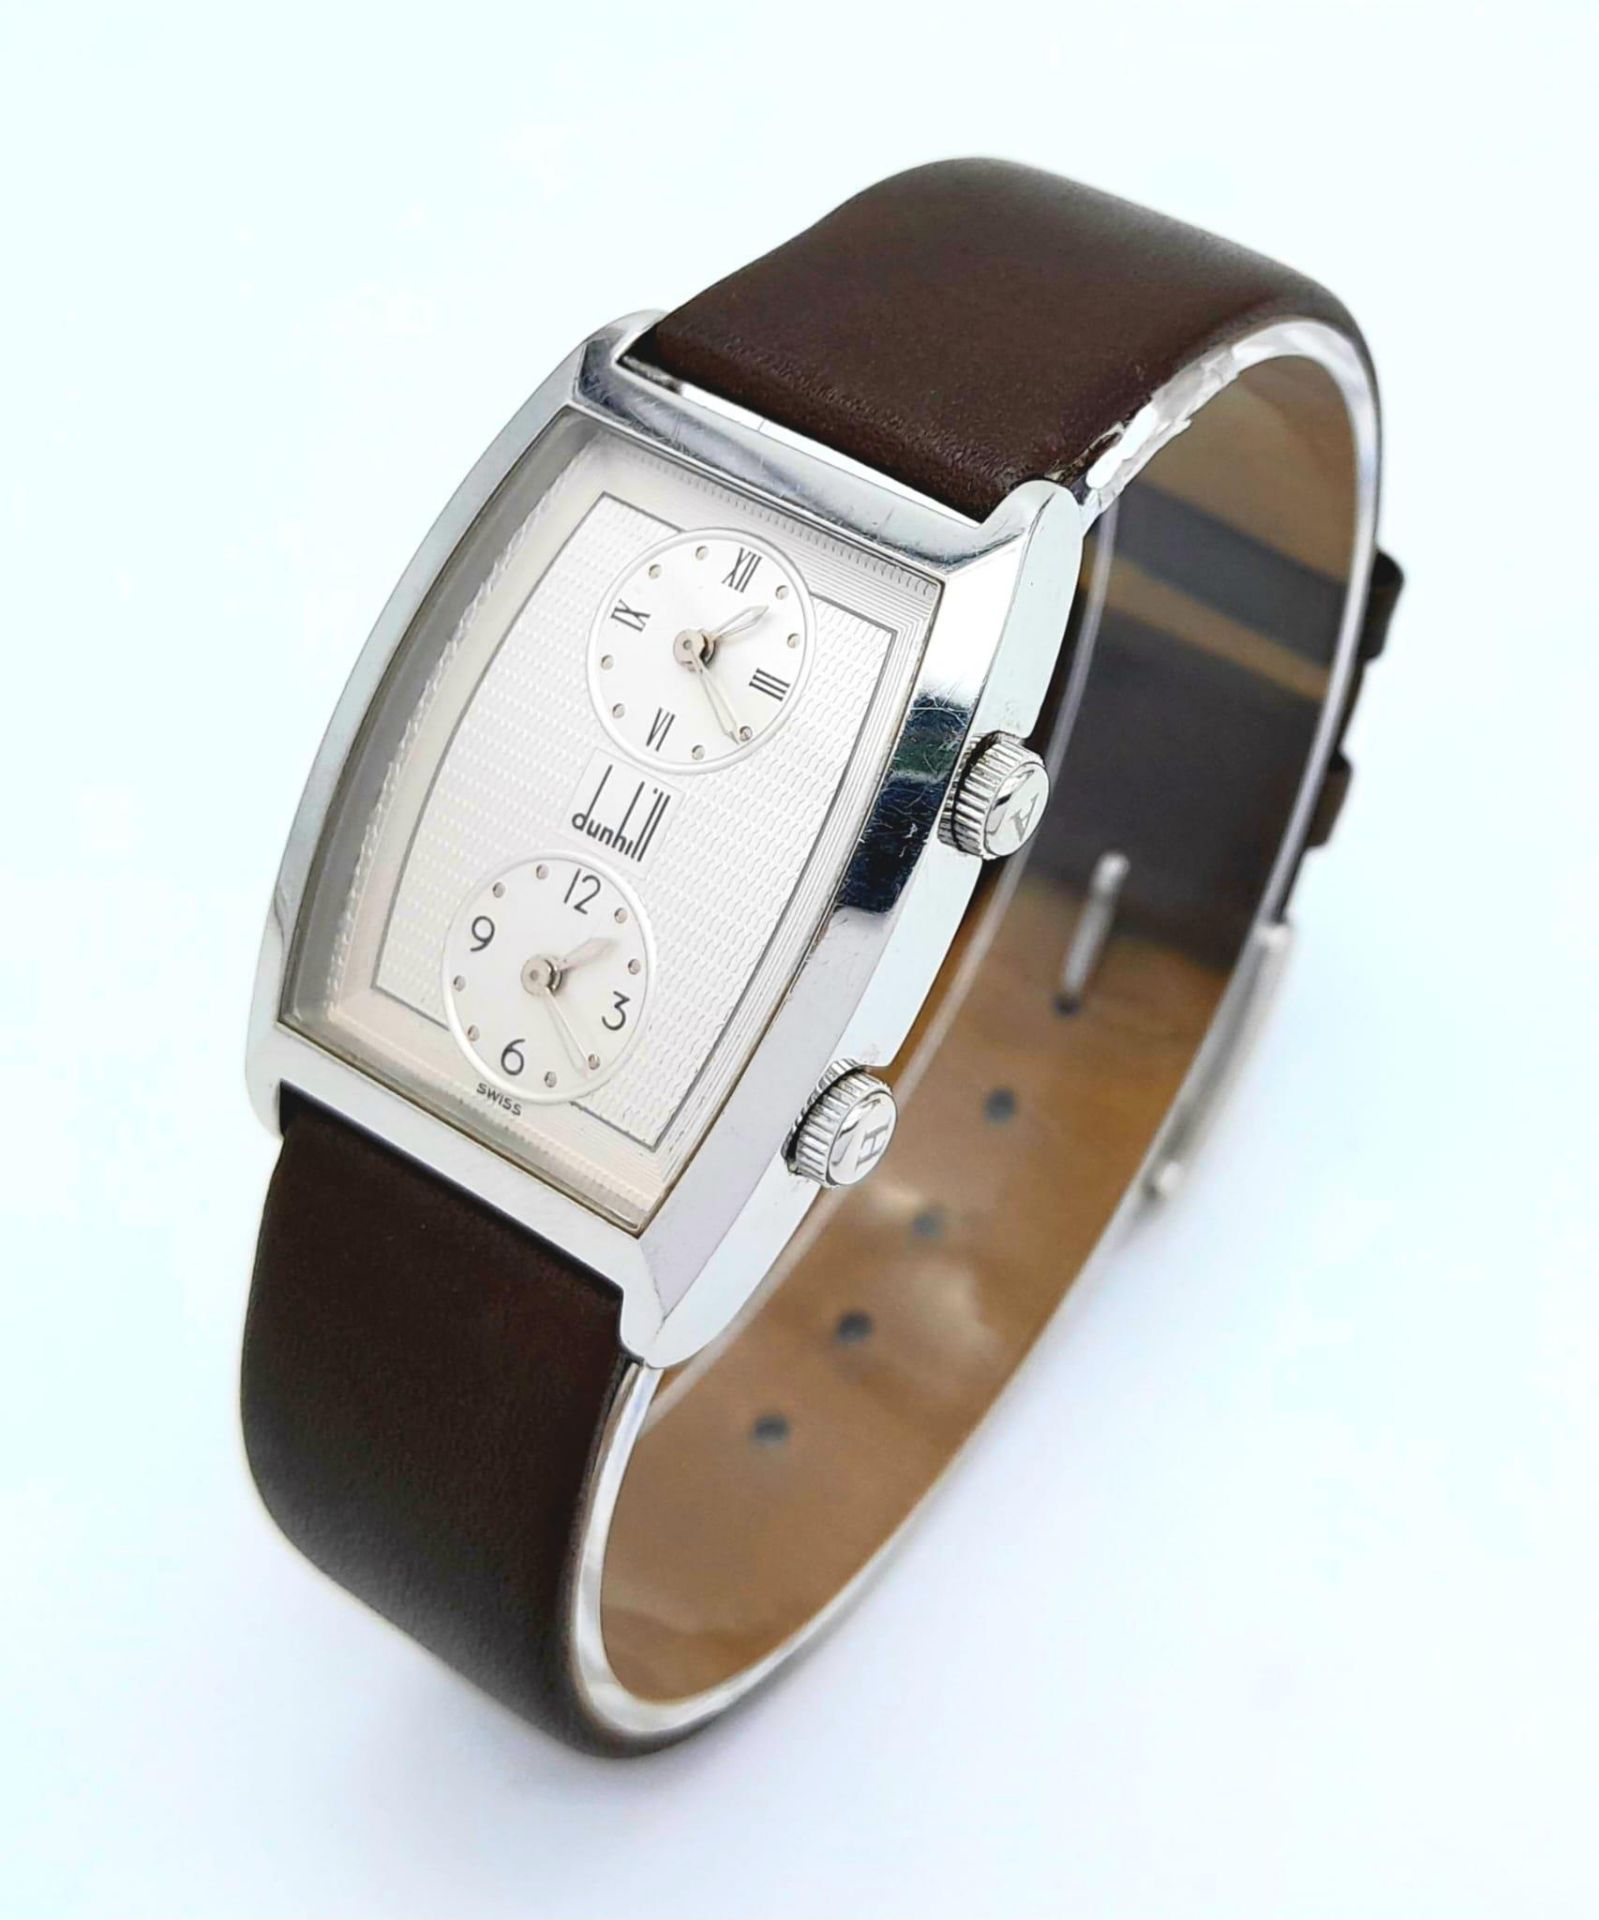 A Vintage Dunhill Quartz Dual Time Watch. Brown leather strap. Stainless steel case - 28mm.